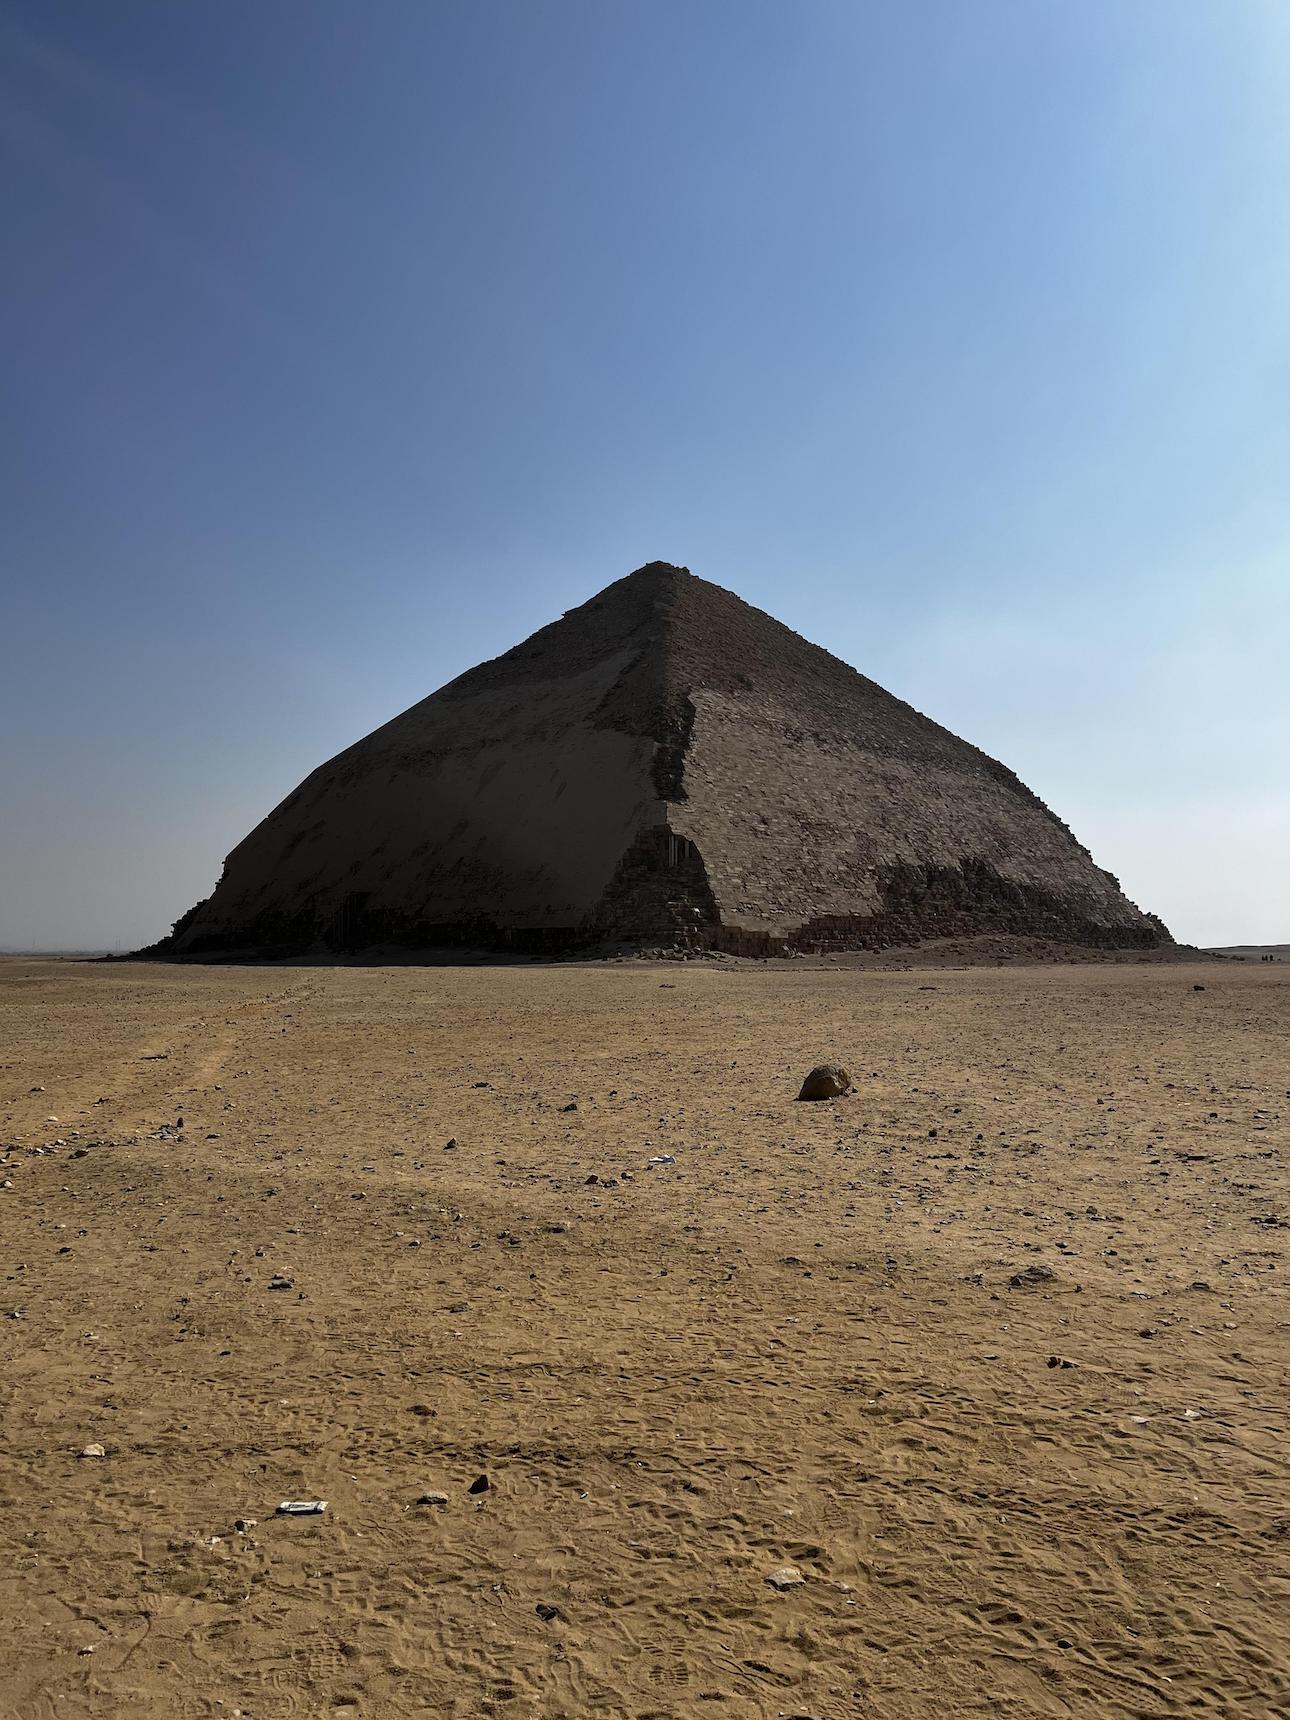 A pyramid made of stone in the desert. The shape is more rounded and the top is at a lower angle than the bottom, giving it a 